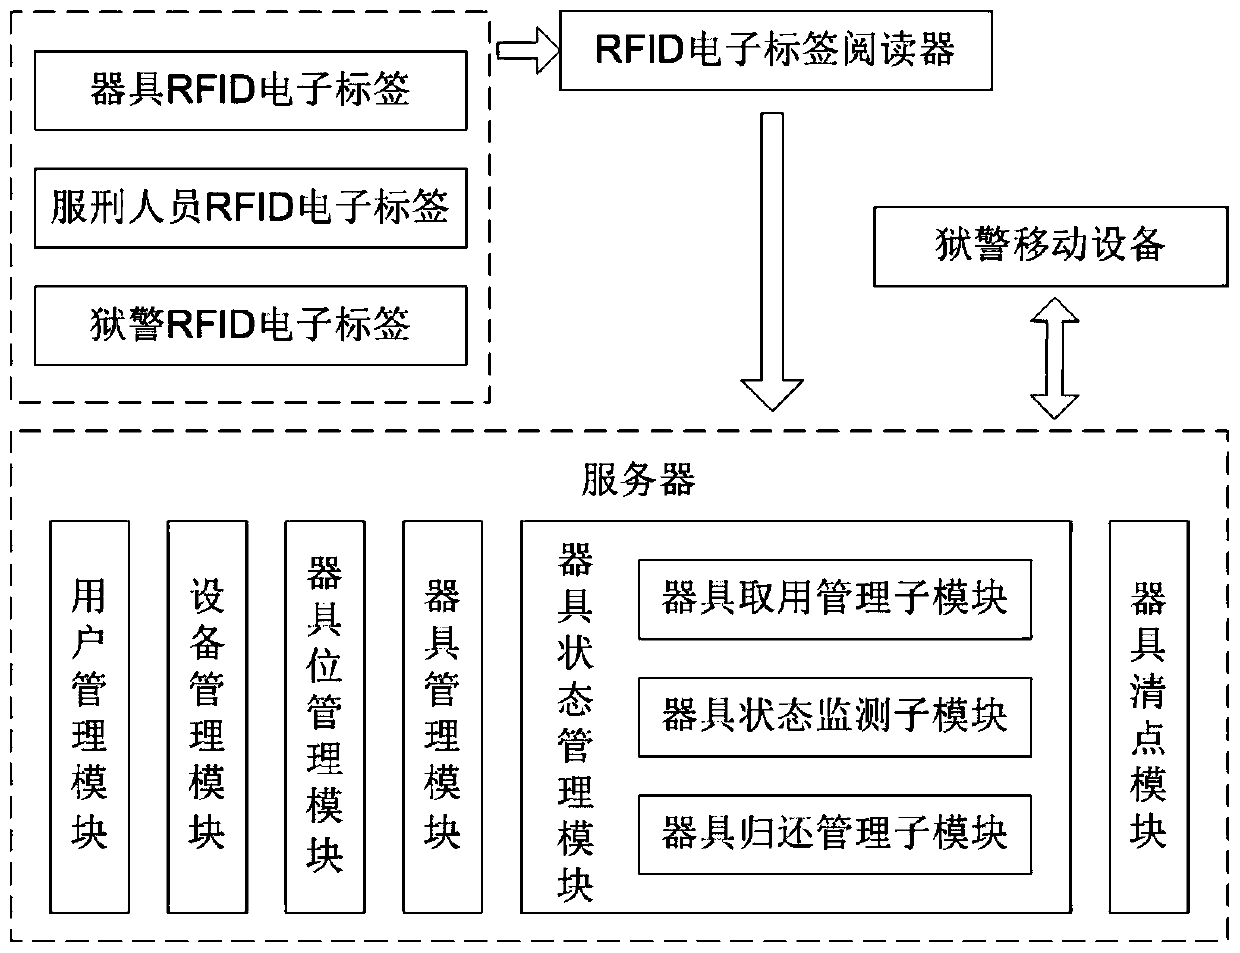 Prison article management system and method based on wireless positioning